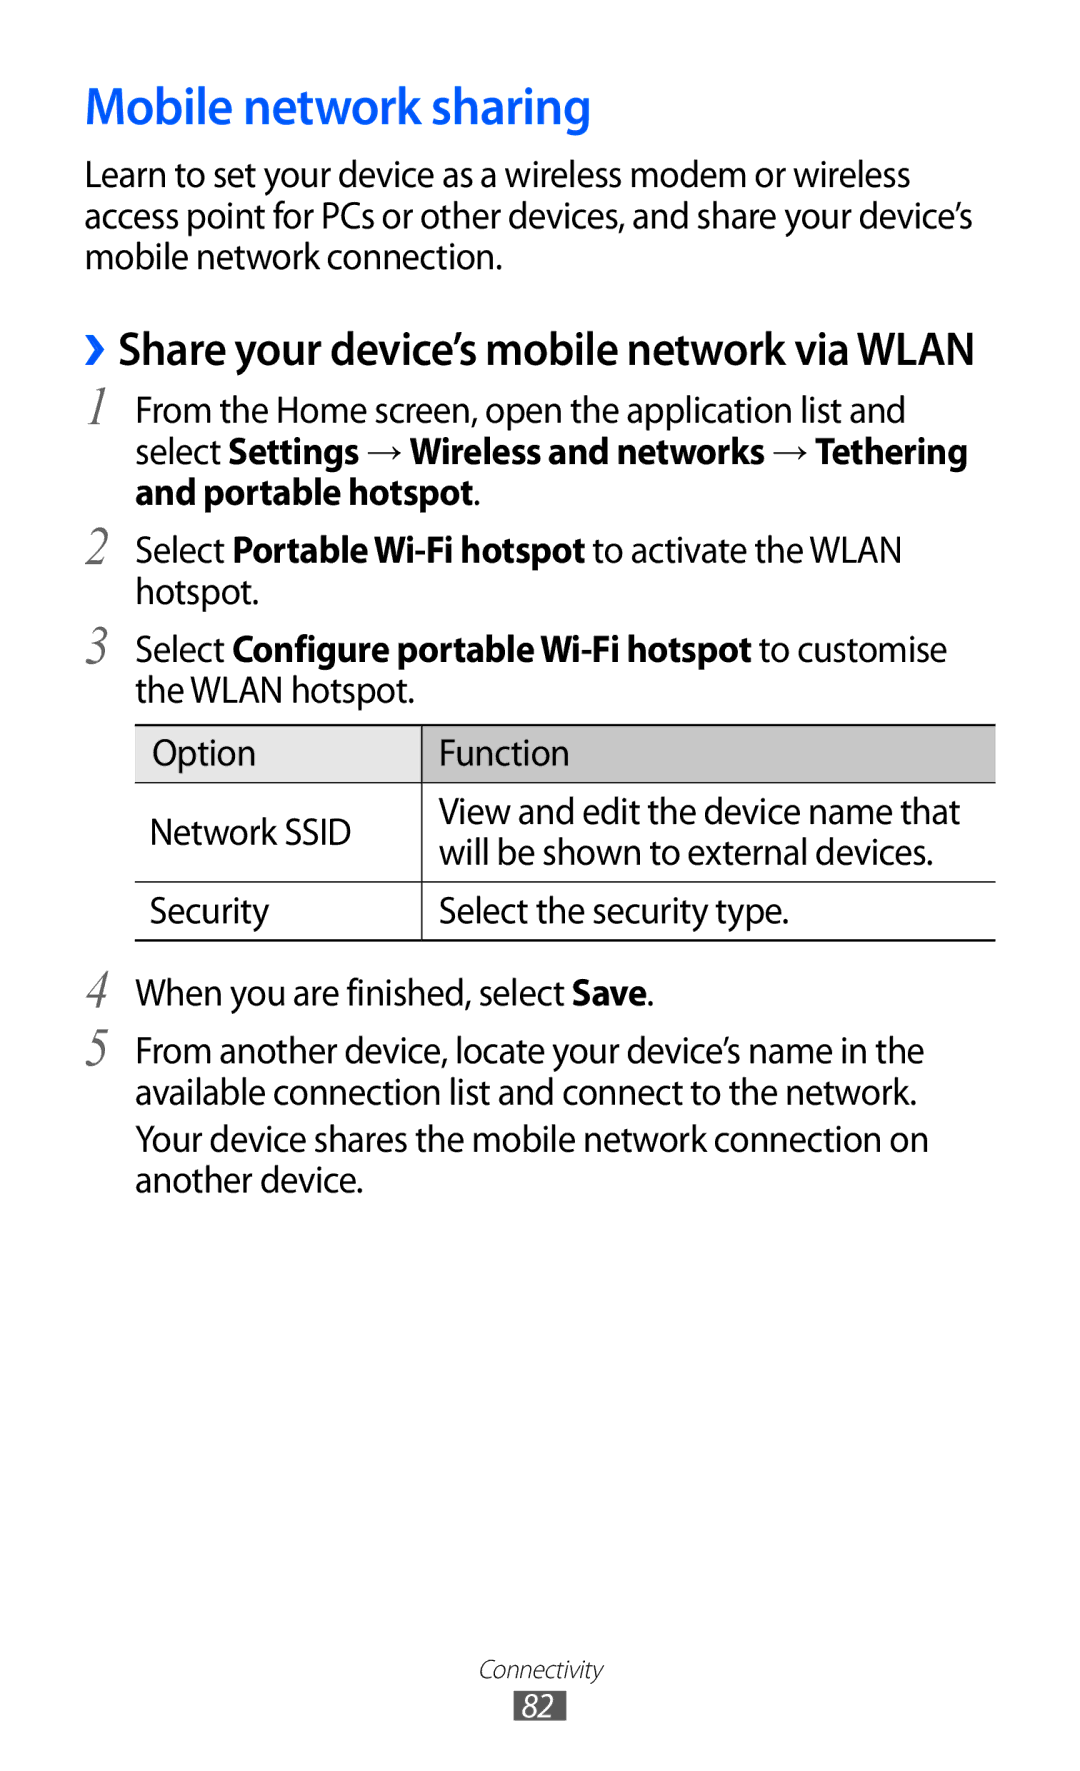 Samsung GT-P7500 user manual Mobile network sharing, Option Function Network Ssid, Will be shown to external devices 